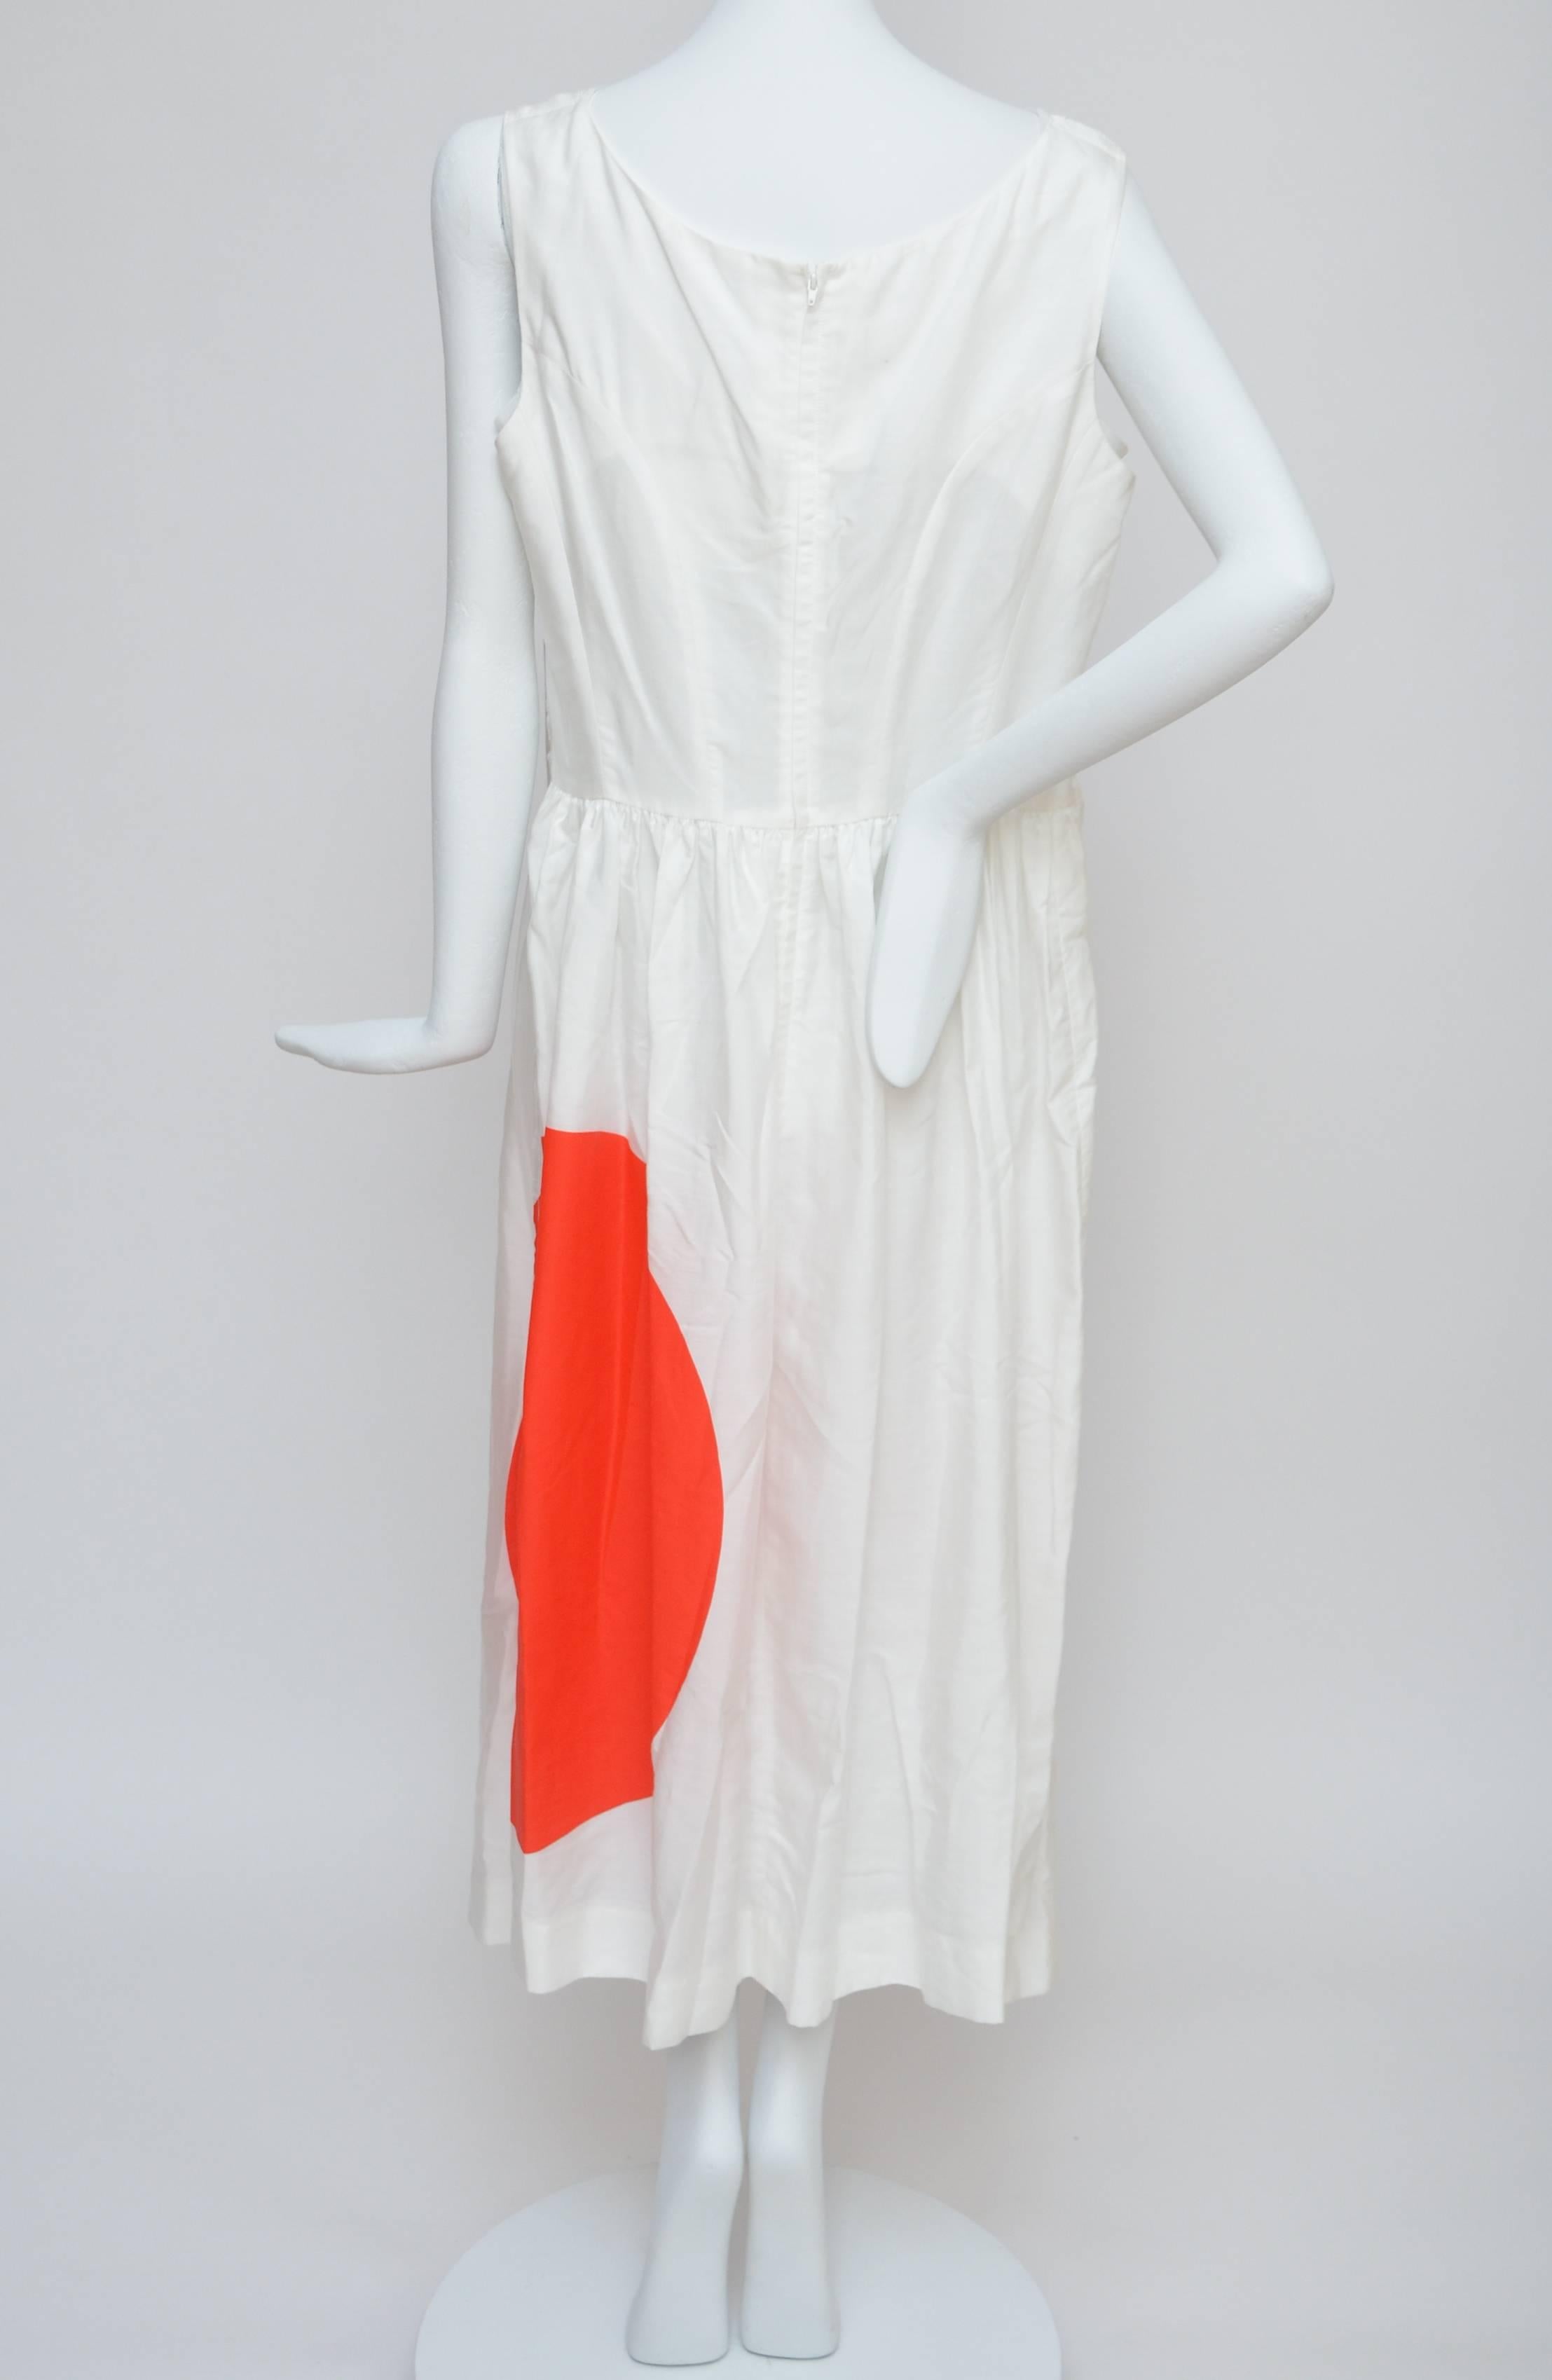 Comme Des Garcons dress from "Rising Sun " collection.
White cotton mix with tulle fabric.Lined in tulle.
Excellent condition,fabric feels new with couple marks from storage that can easily be cleaned.
Size L.
Made in japan.

FINAL